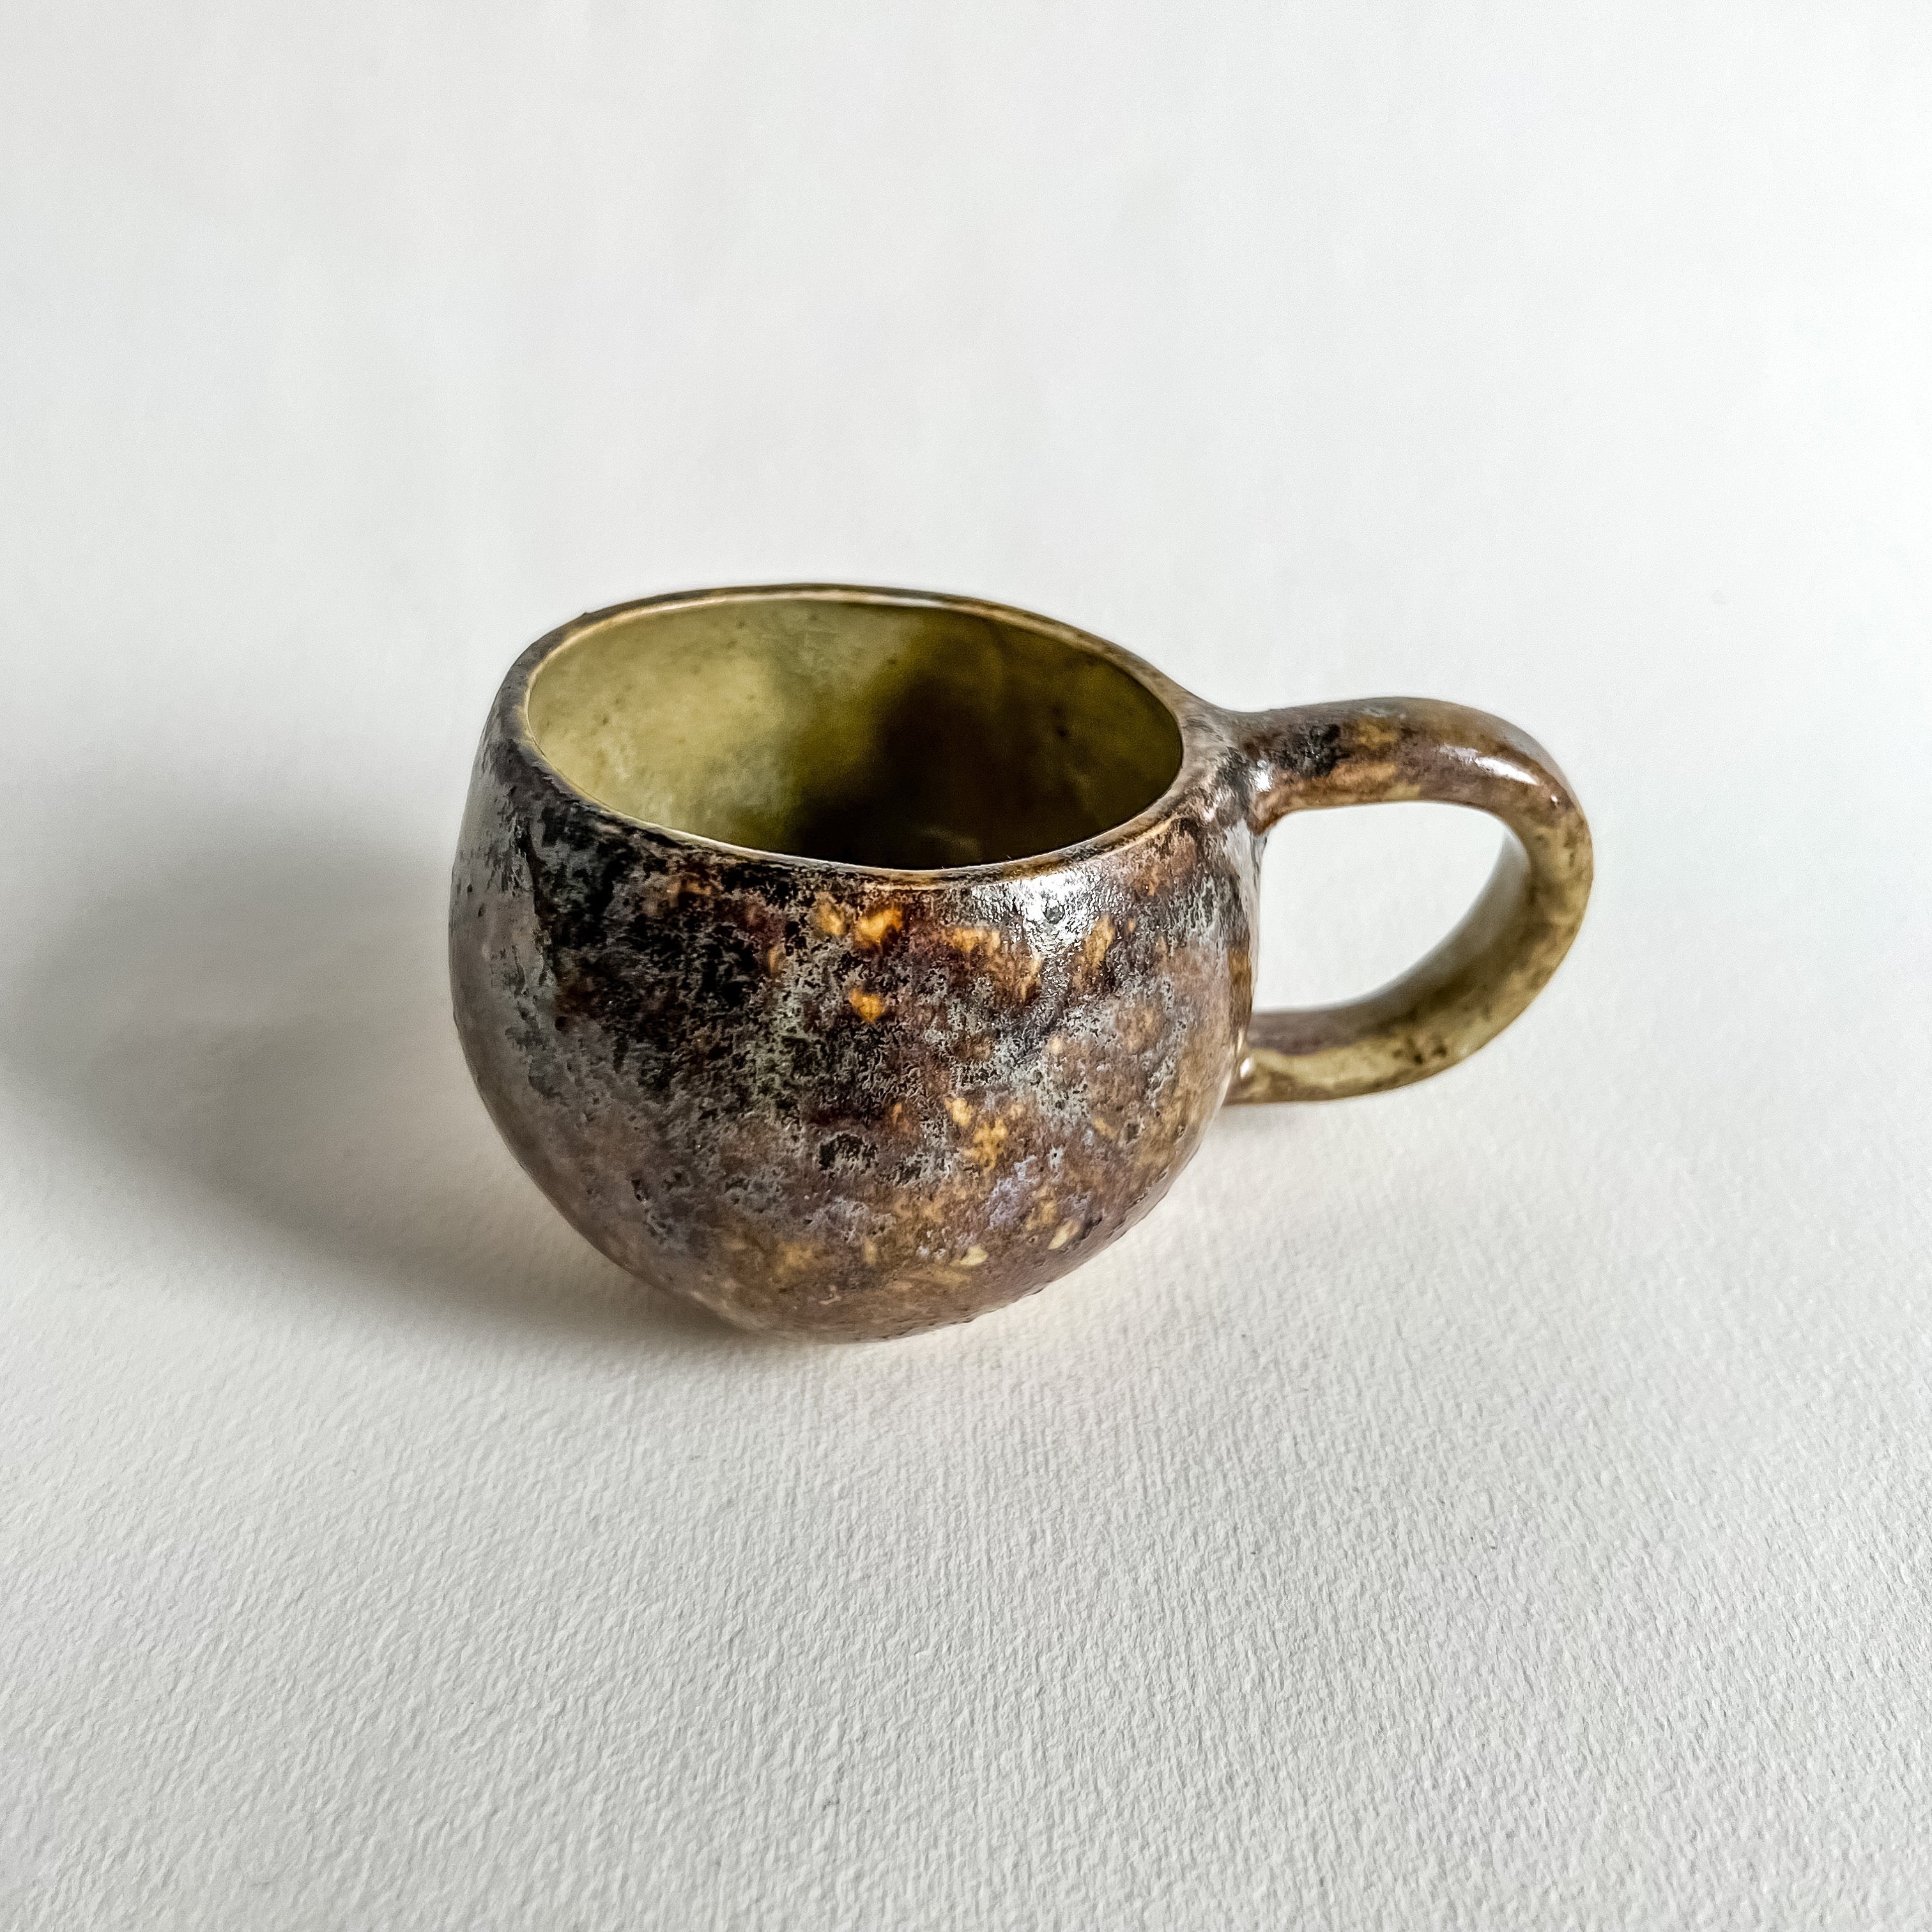 handmade coffee cups from Mexico